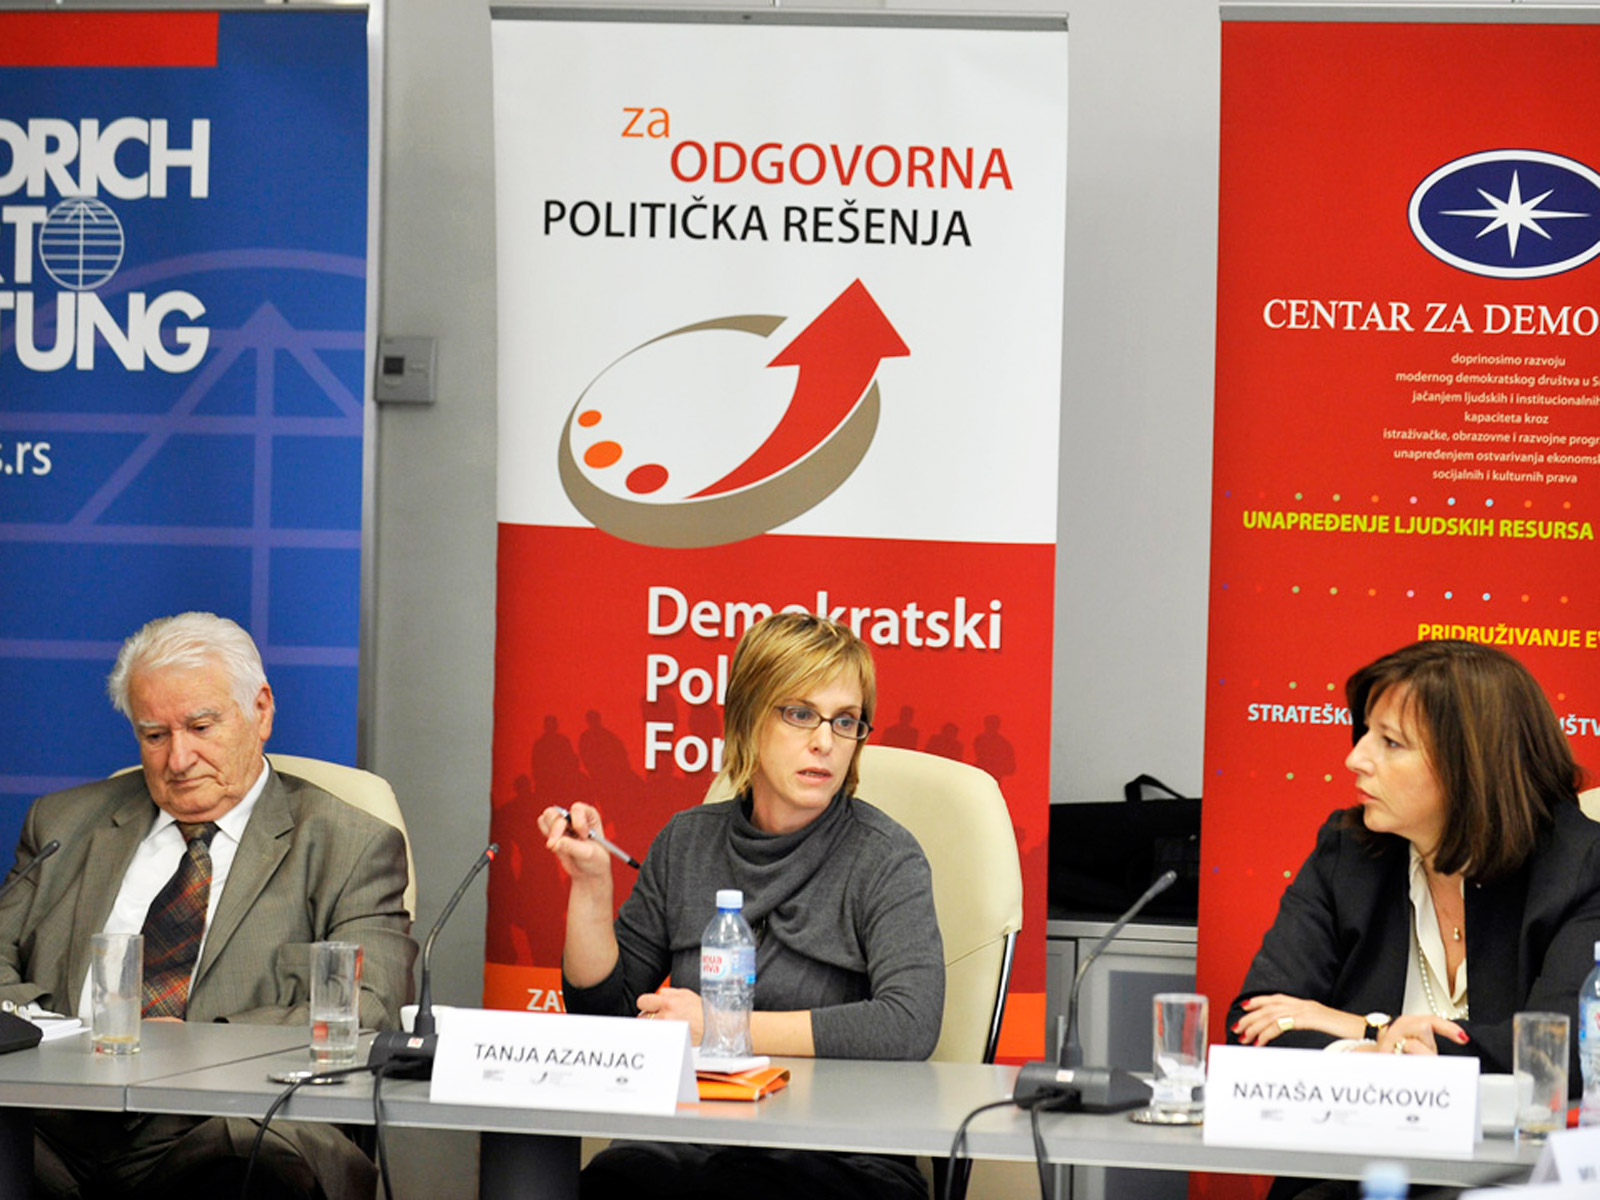 Democratic Political Forum: It Is Necessary To Treat Youth Problems Systematically